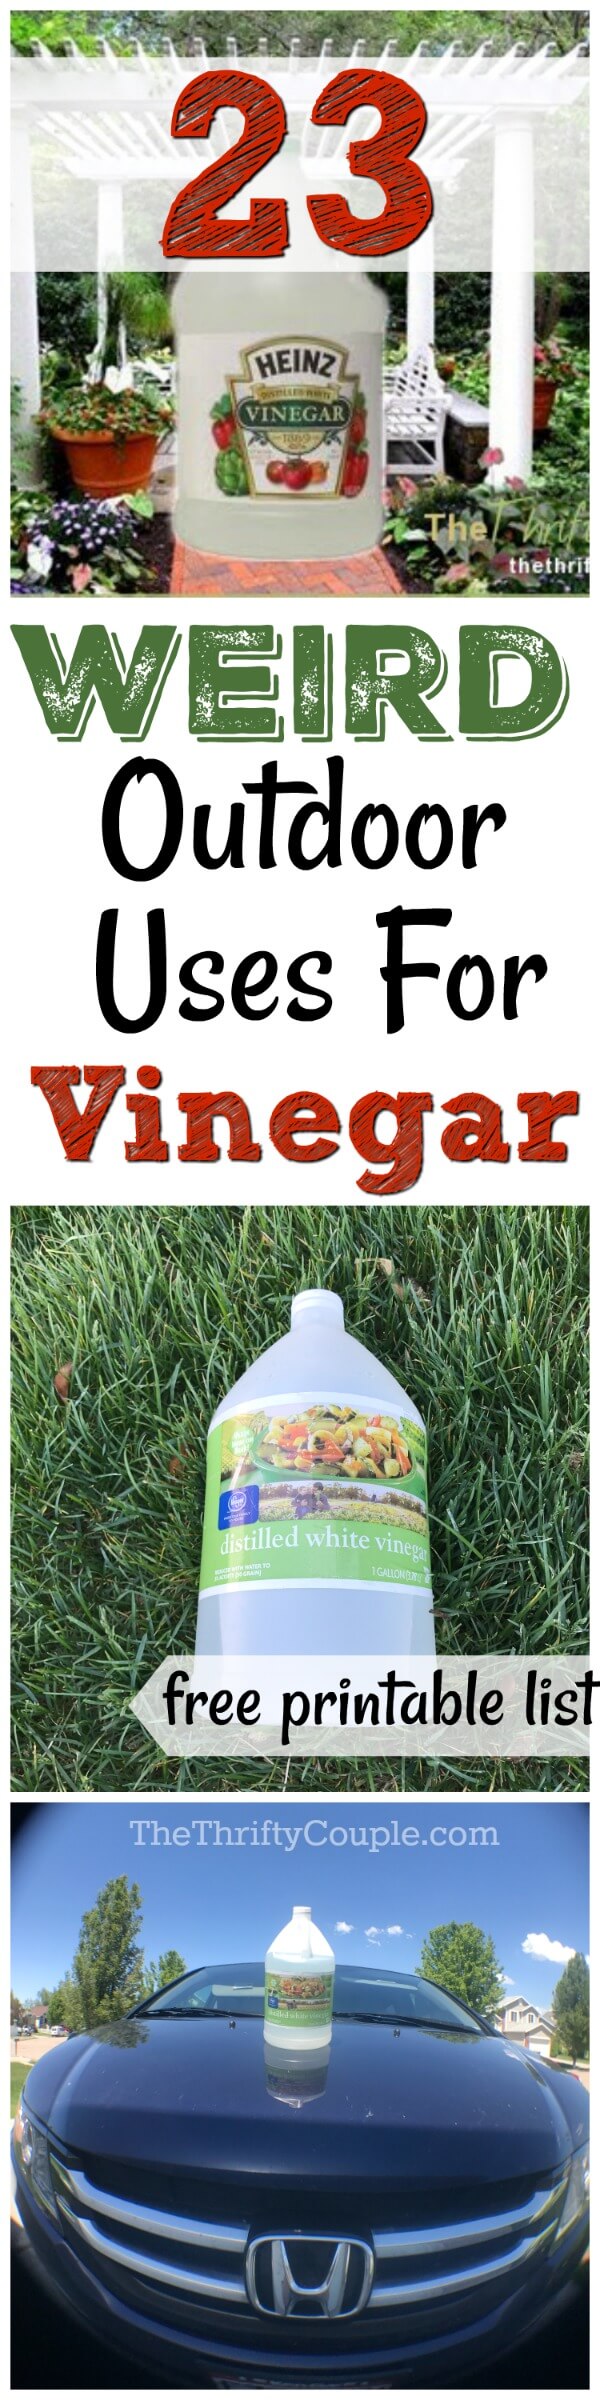 using vinegar outdoors for garden, yard, car and more